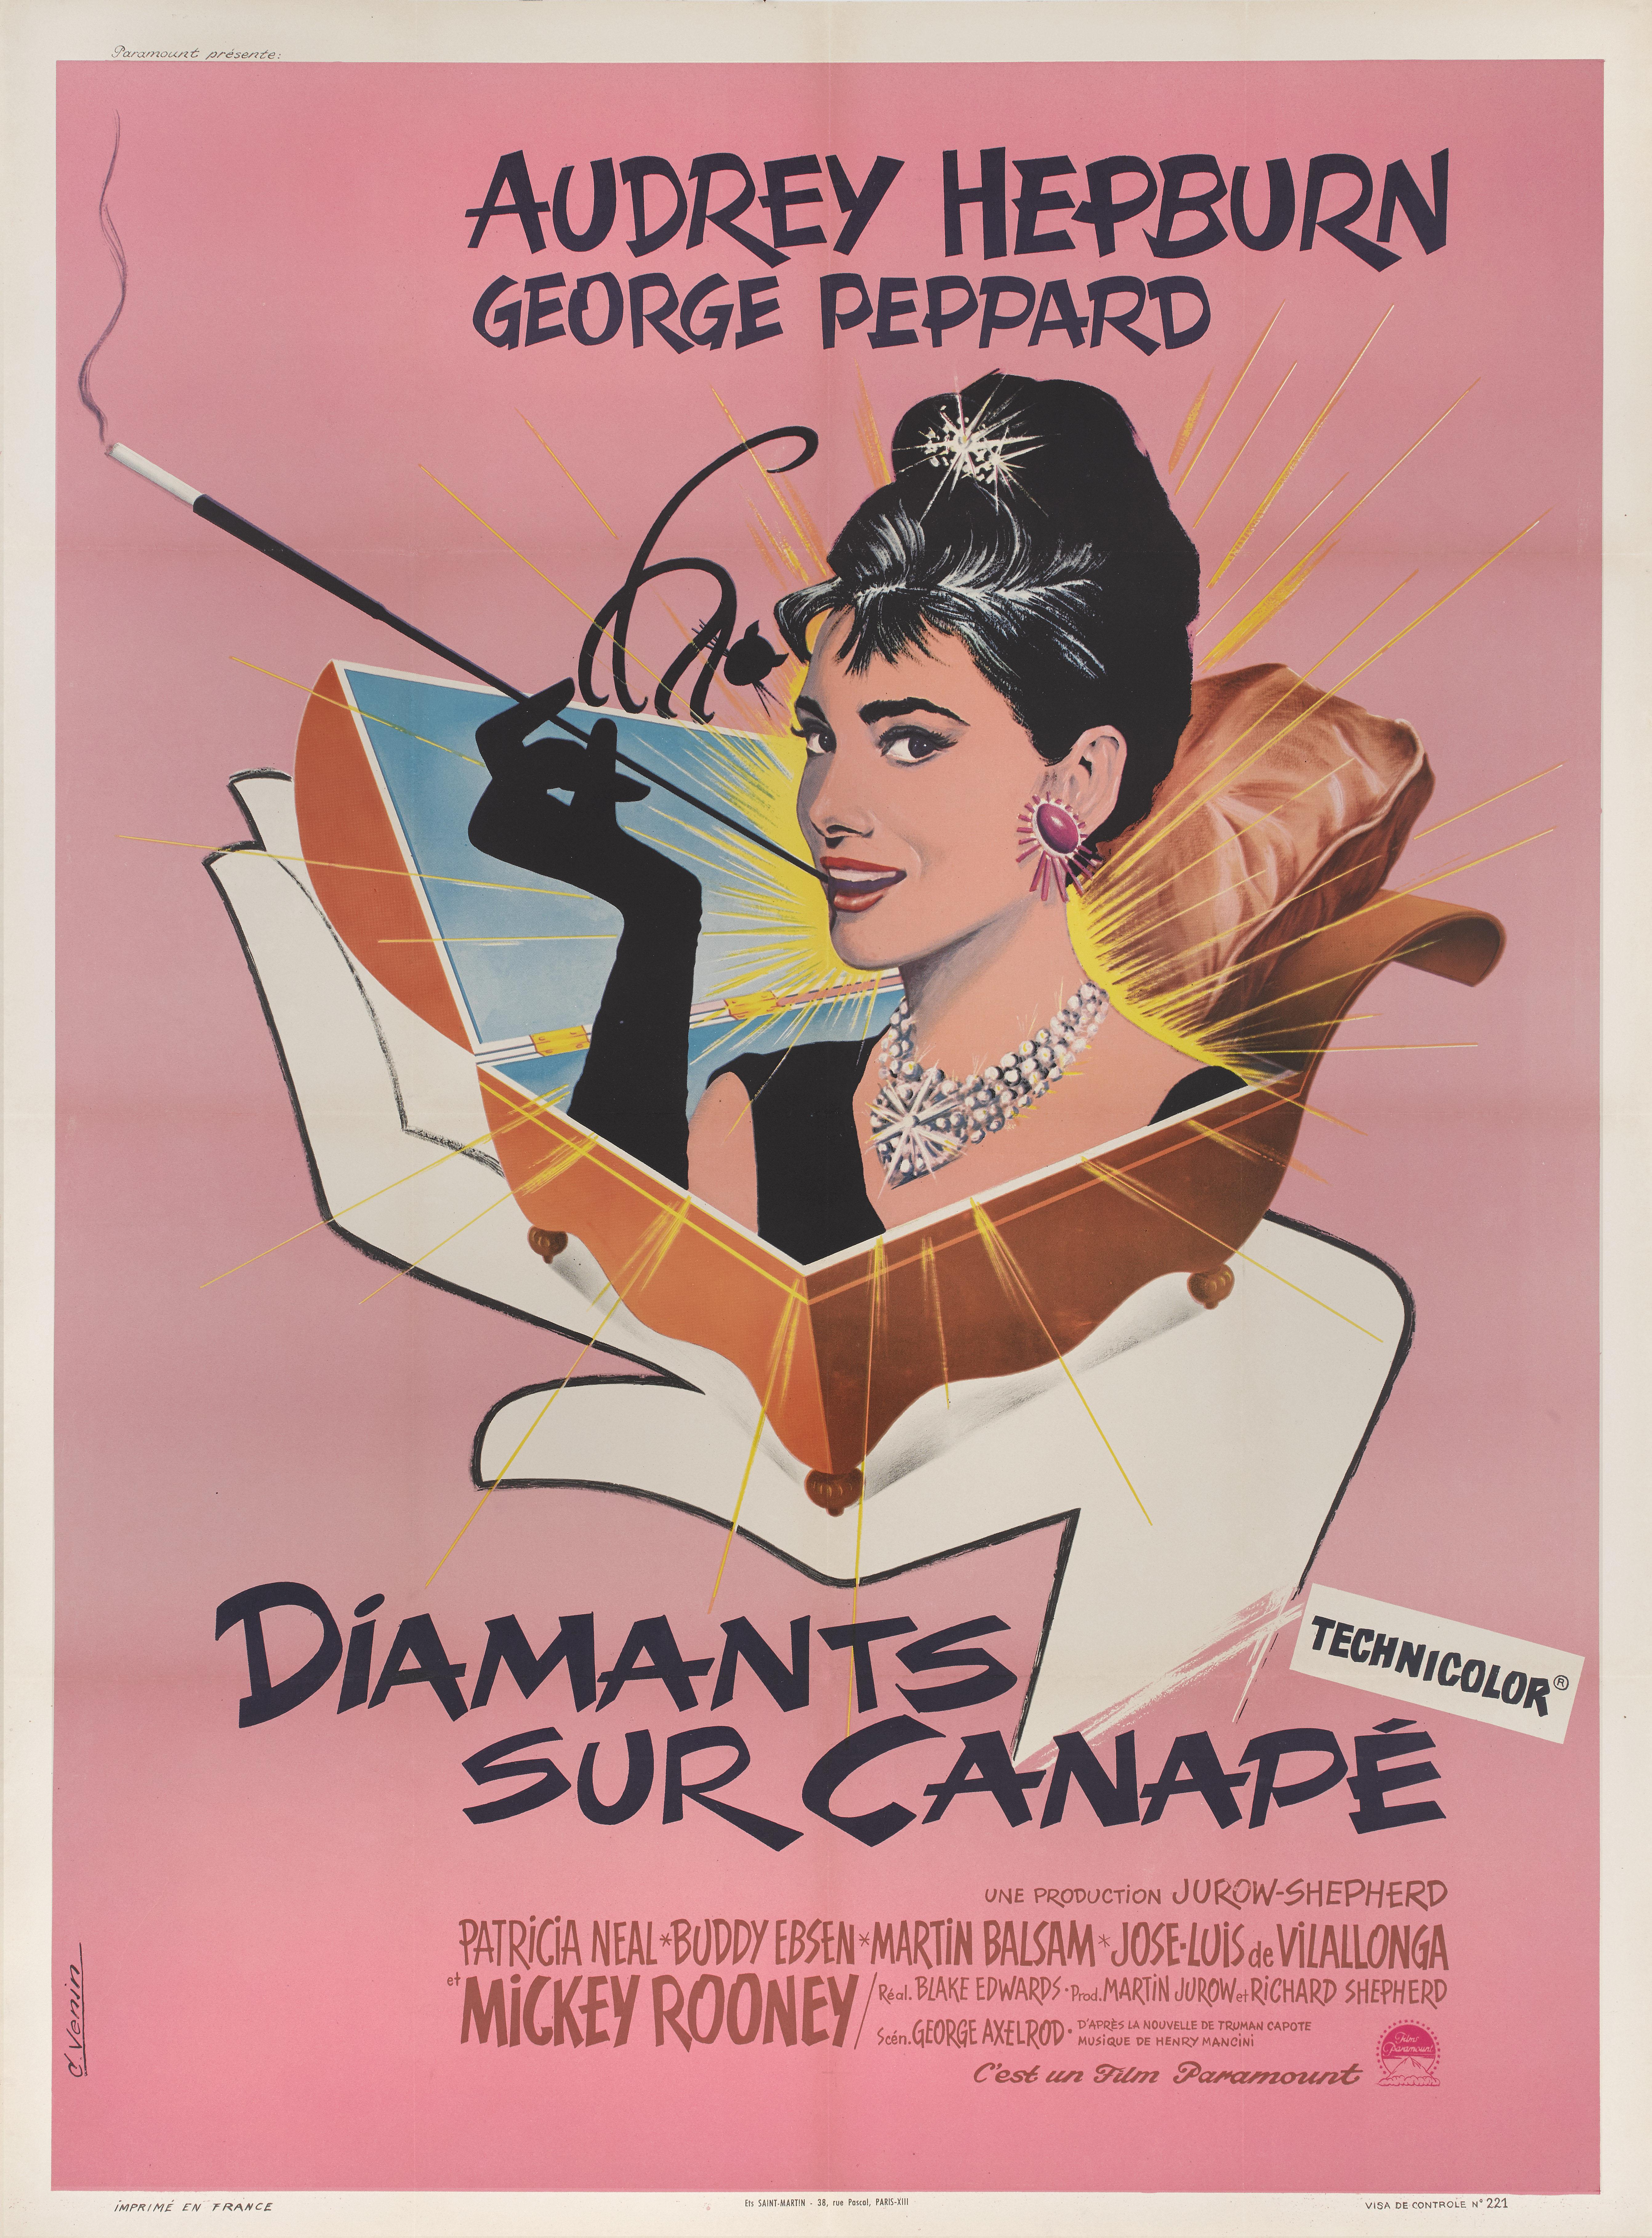 Original French film poster for Audrey Hepburn, George Peppard's Classic 
1961 Comedy Romance. Directed by Blake Edwards, Tiffany's remains the number one best Audrey Hepburn title and posters on the film are all highly sort after. The beautiful